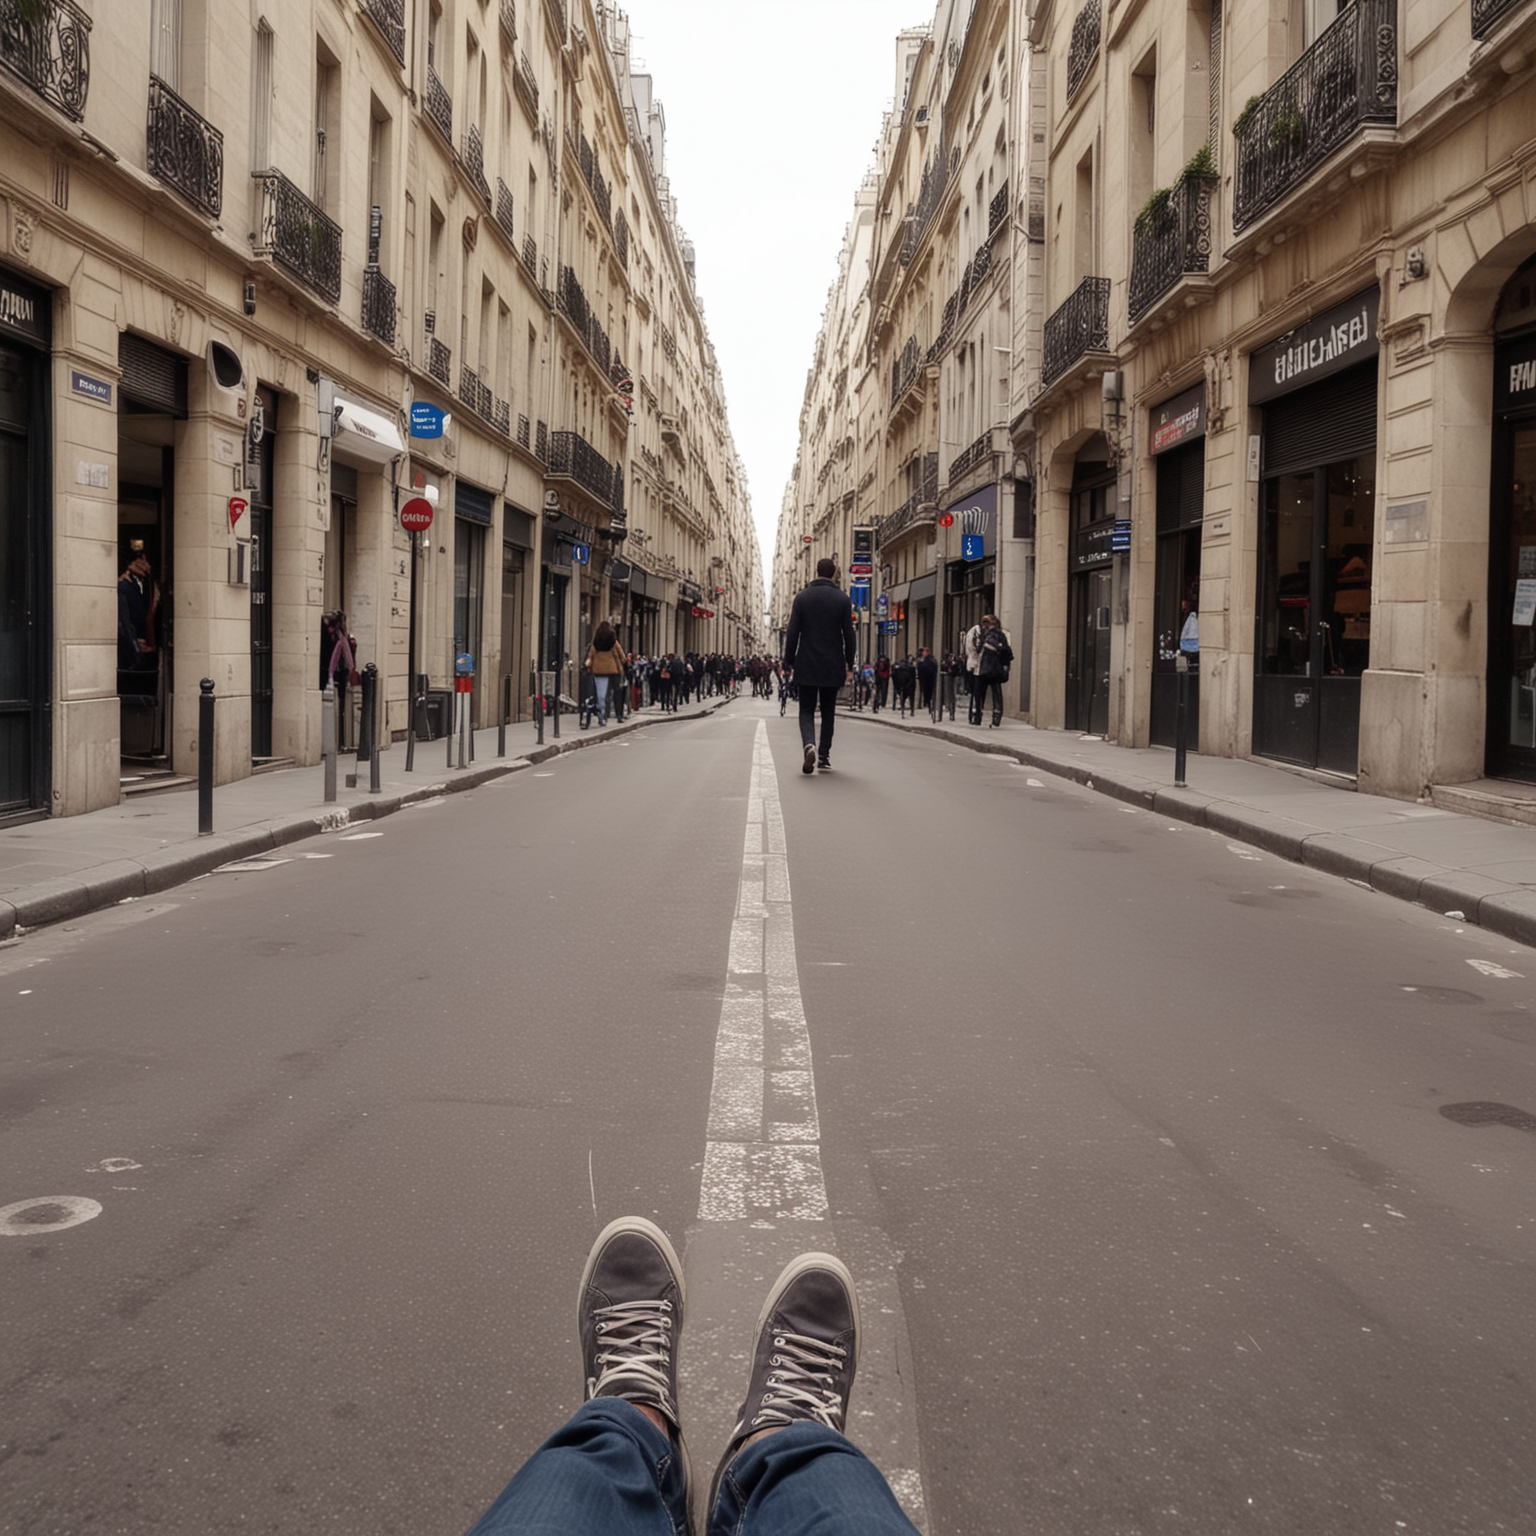 POV 1st person, walking down a busy street in paris, france


